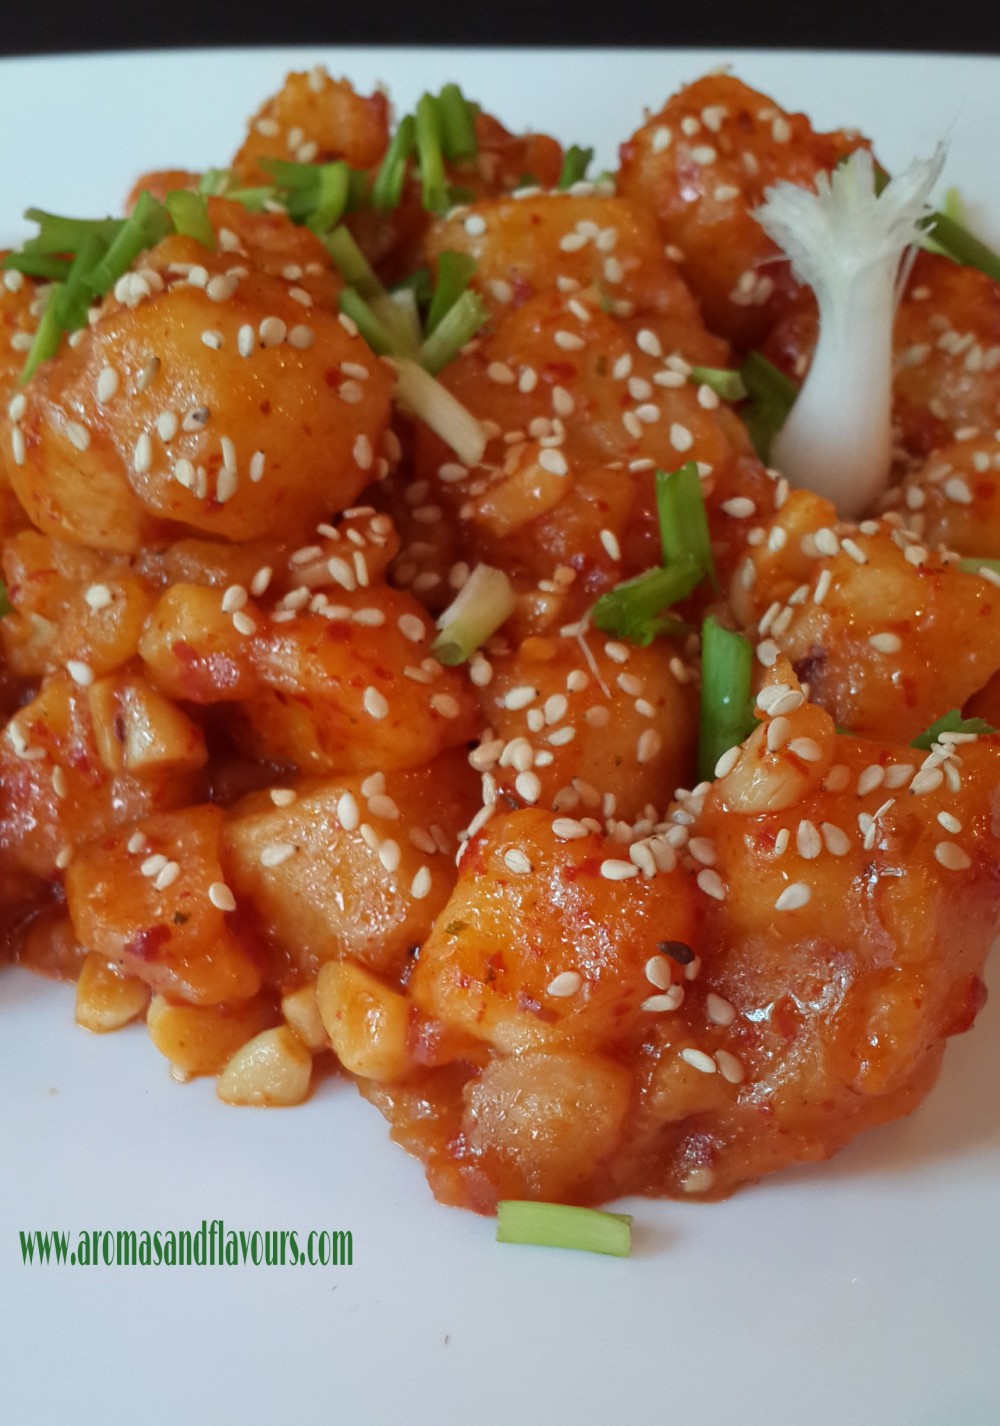 Sweet and sour sticky potatoes